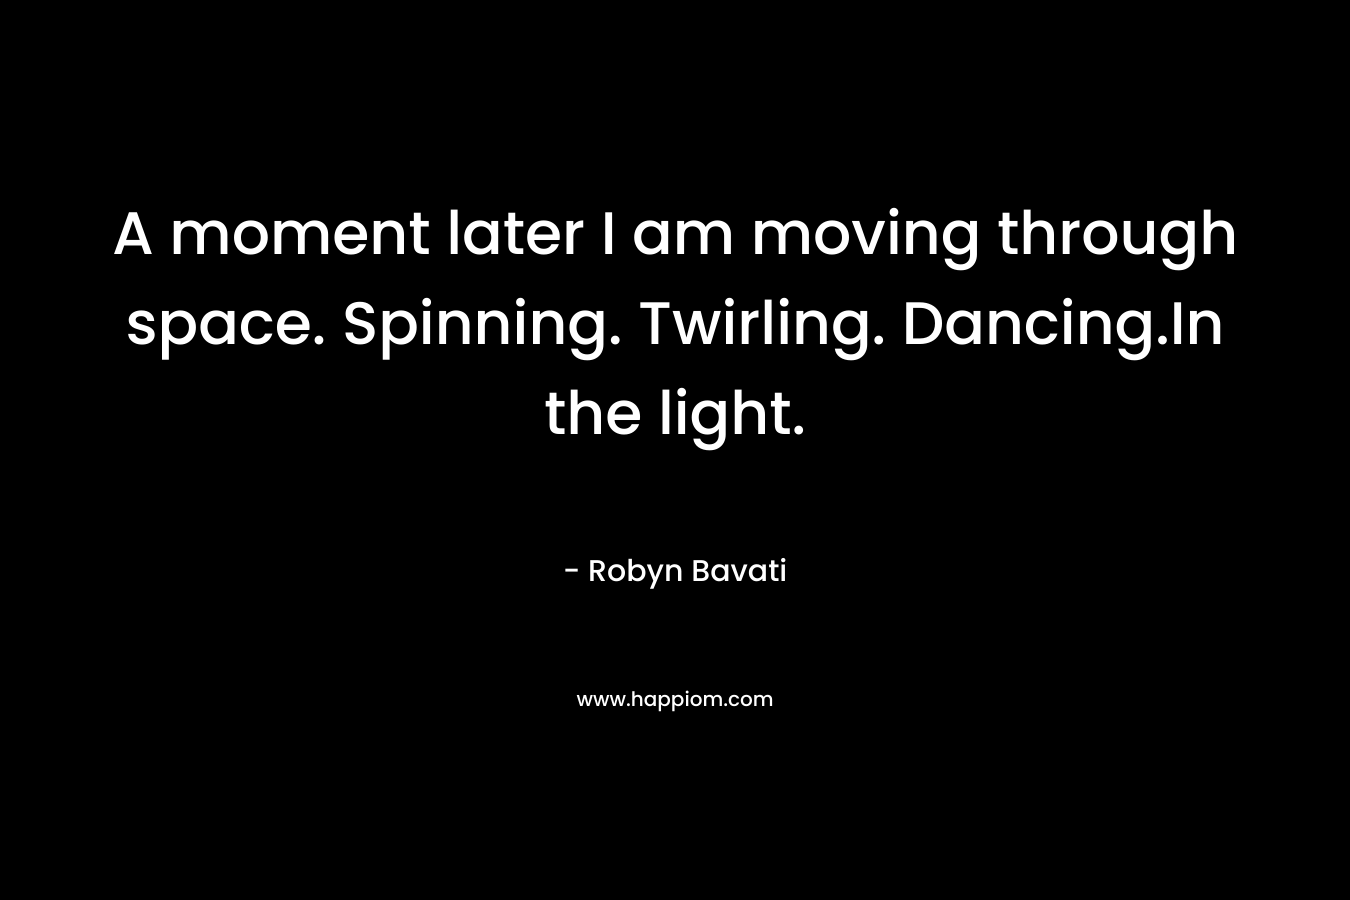 A moment later I am moving through space. Spinning. Twirling. Dancing.In the light. – Robyn Bavati